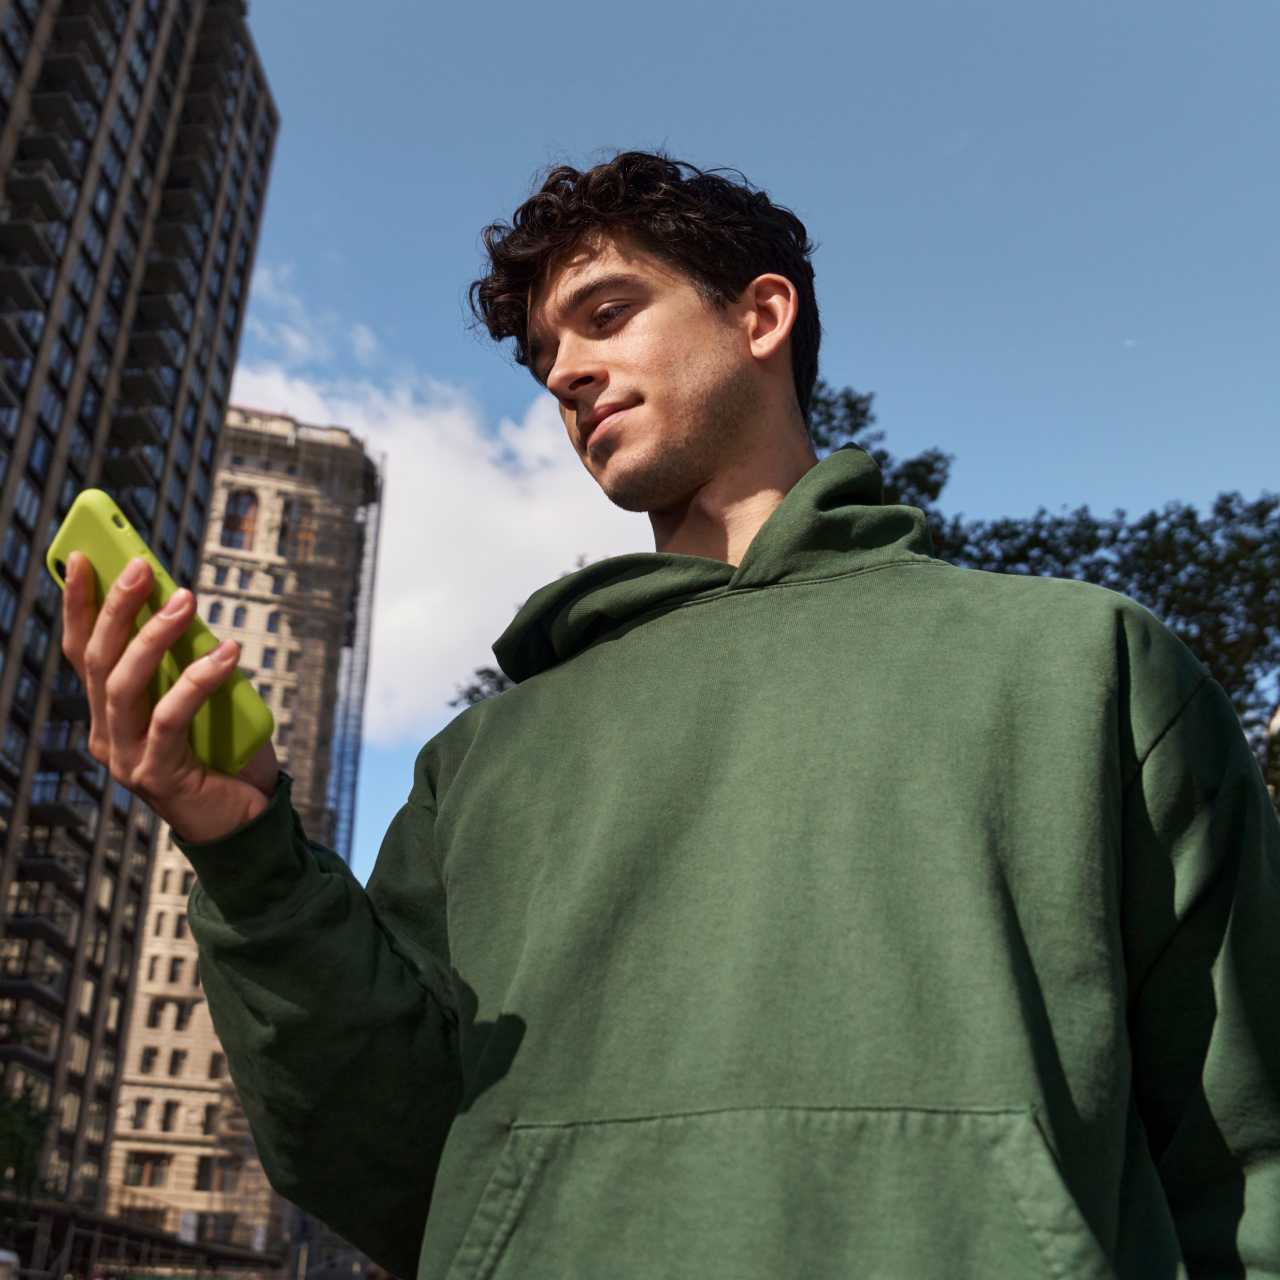 Young man in a green sweatshirt standing on city street while looking at lime green smartphone